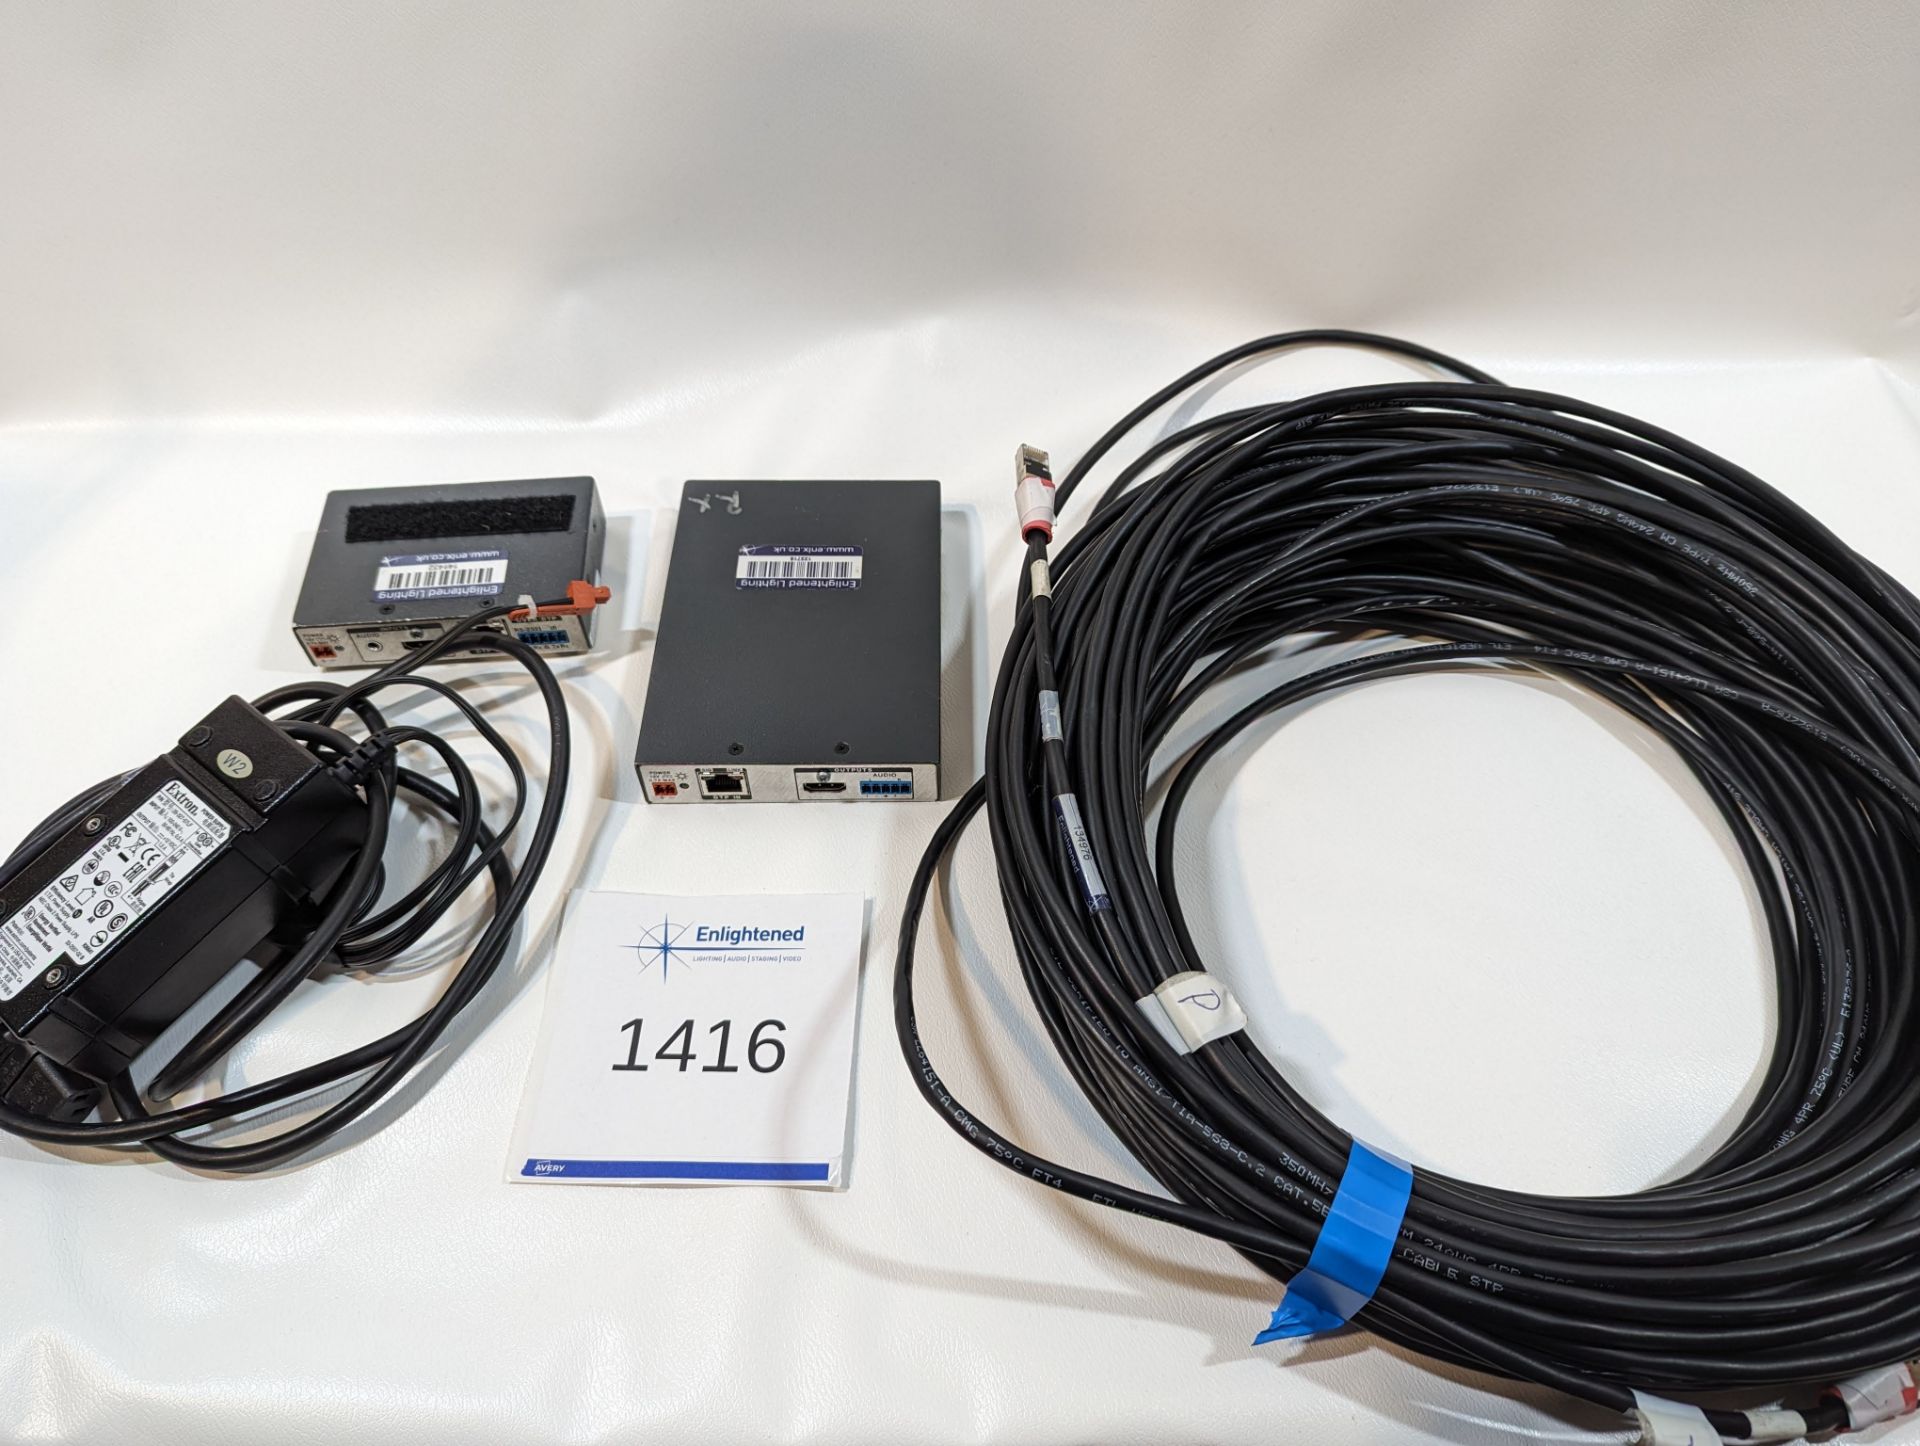 Extron hdmi over cat 5 kits inc 50m cat5 - Image 5 of 5